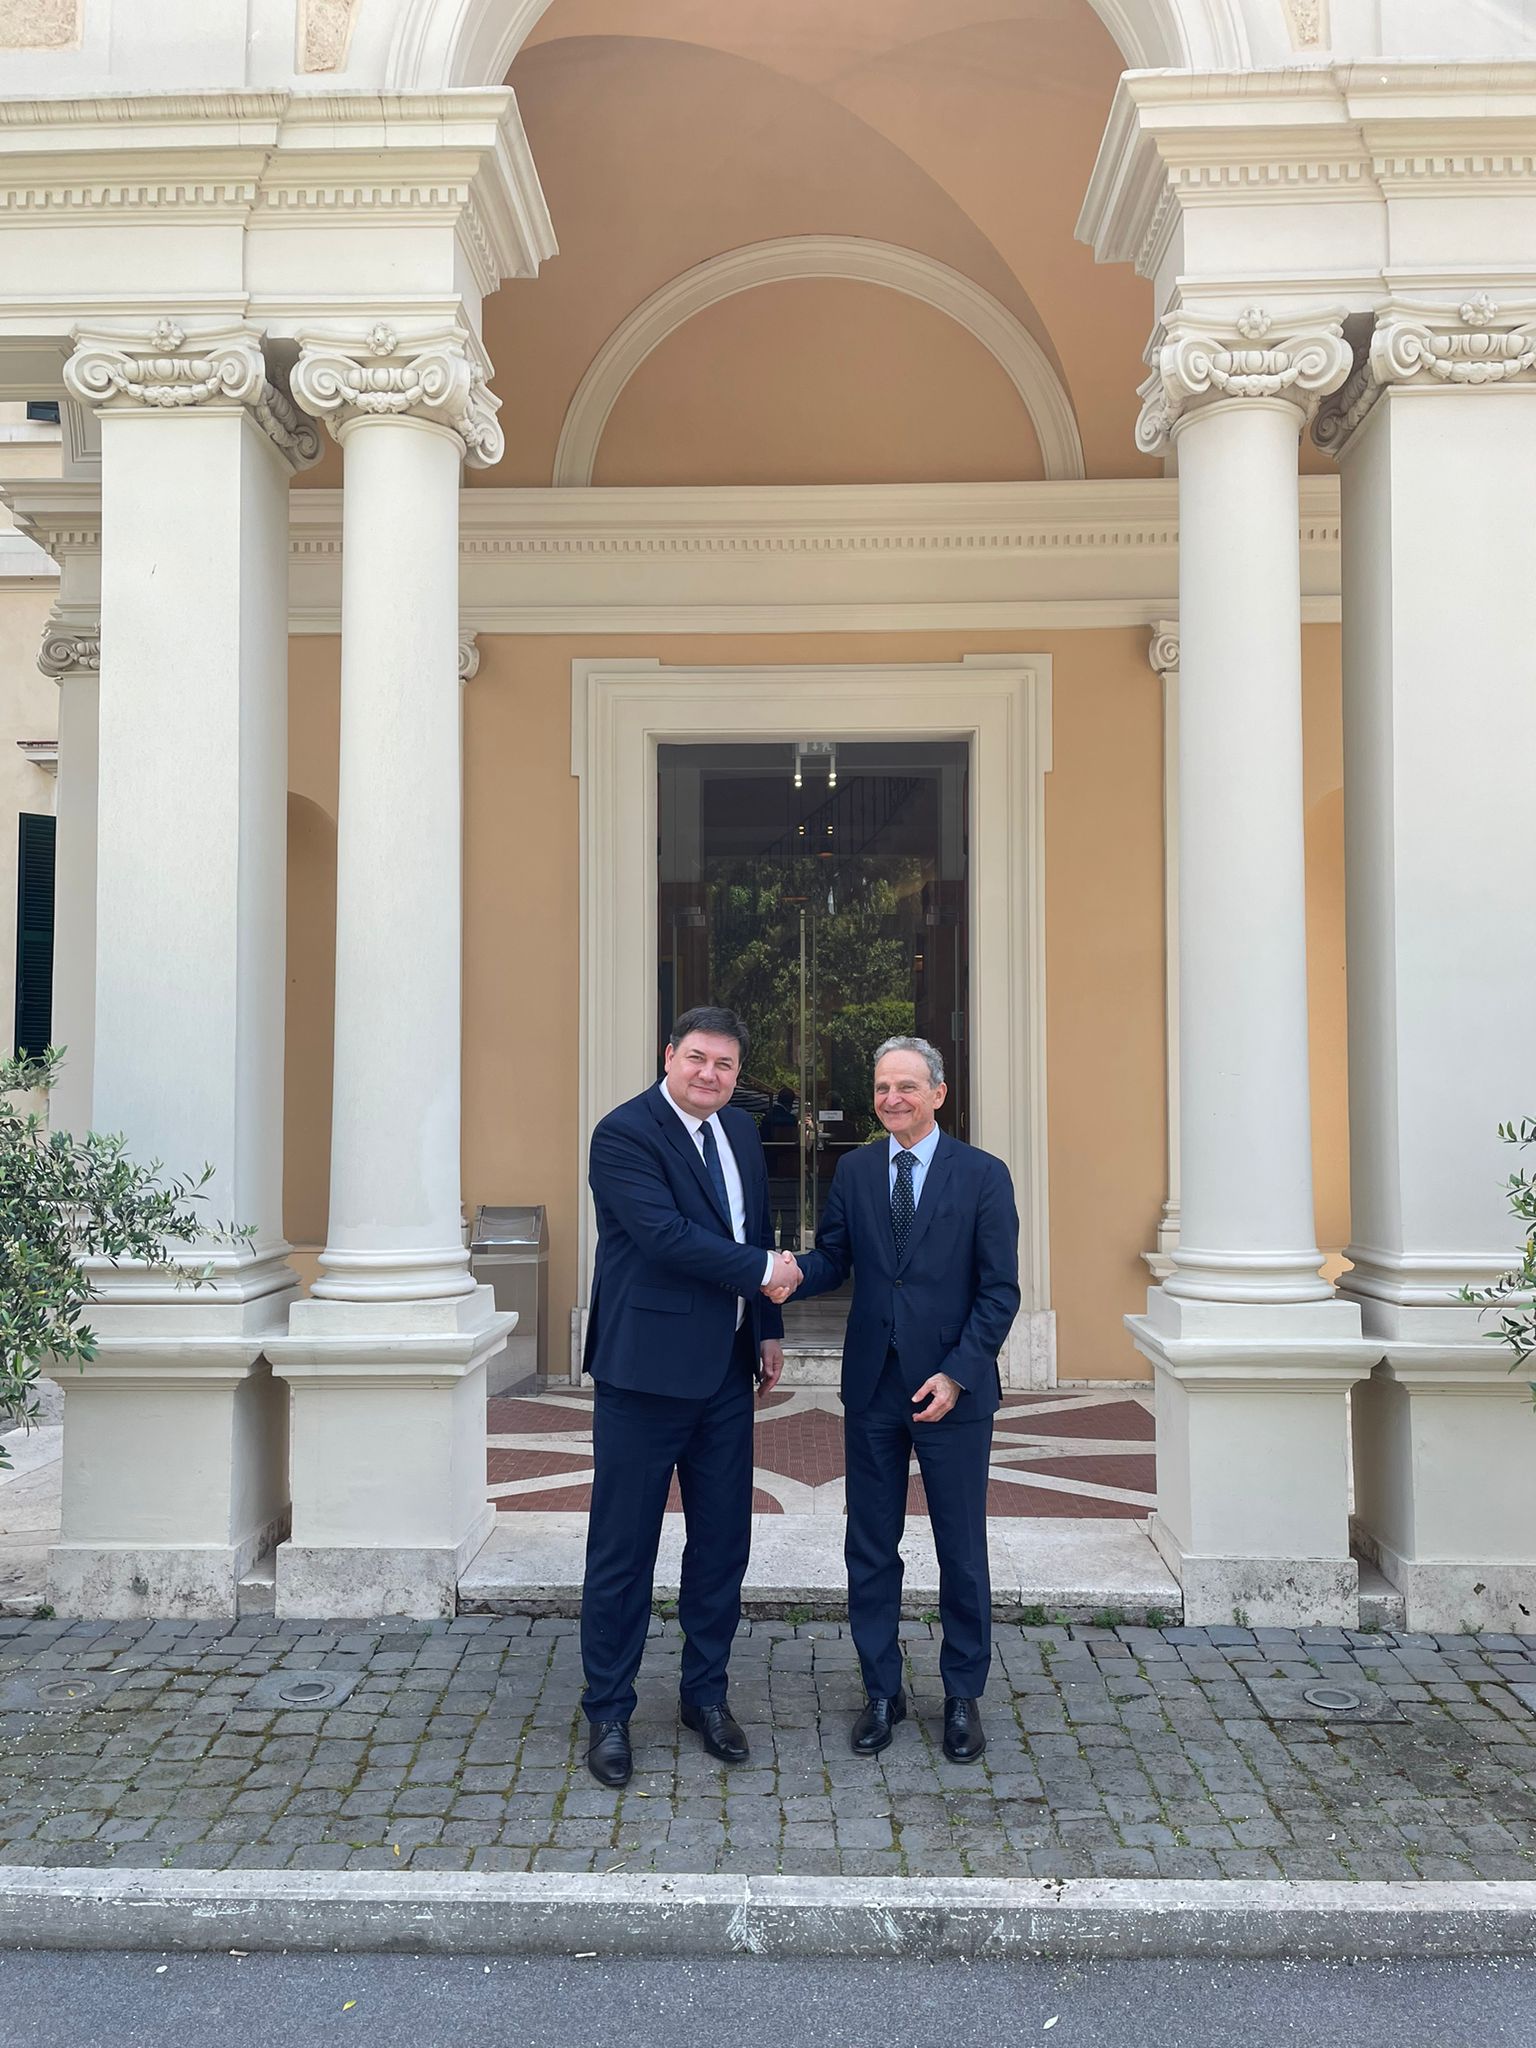 THE SIGNED MEMORANDUM MAKES THE COOPERATION BETWEEN NAPA AND LUISS UNIVERSITY OF ROME OFFICIAL